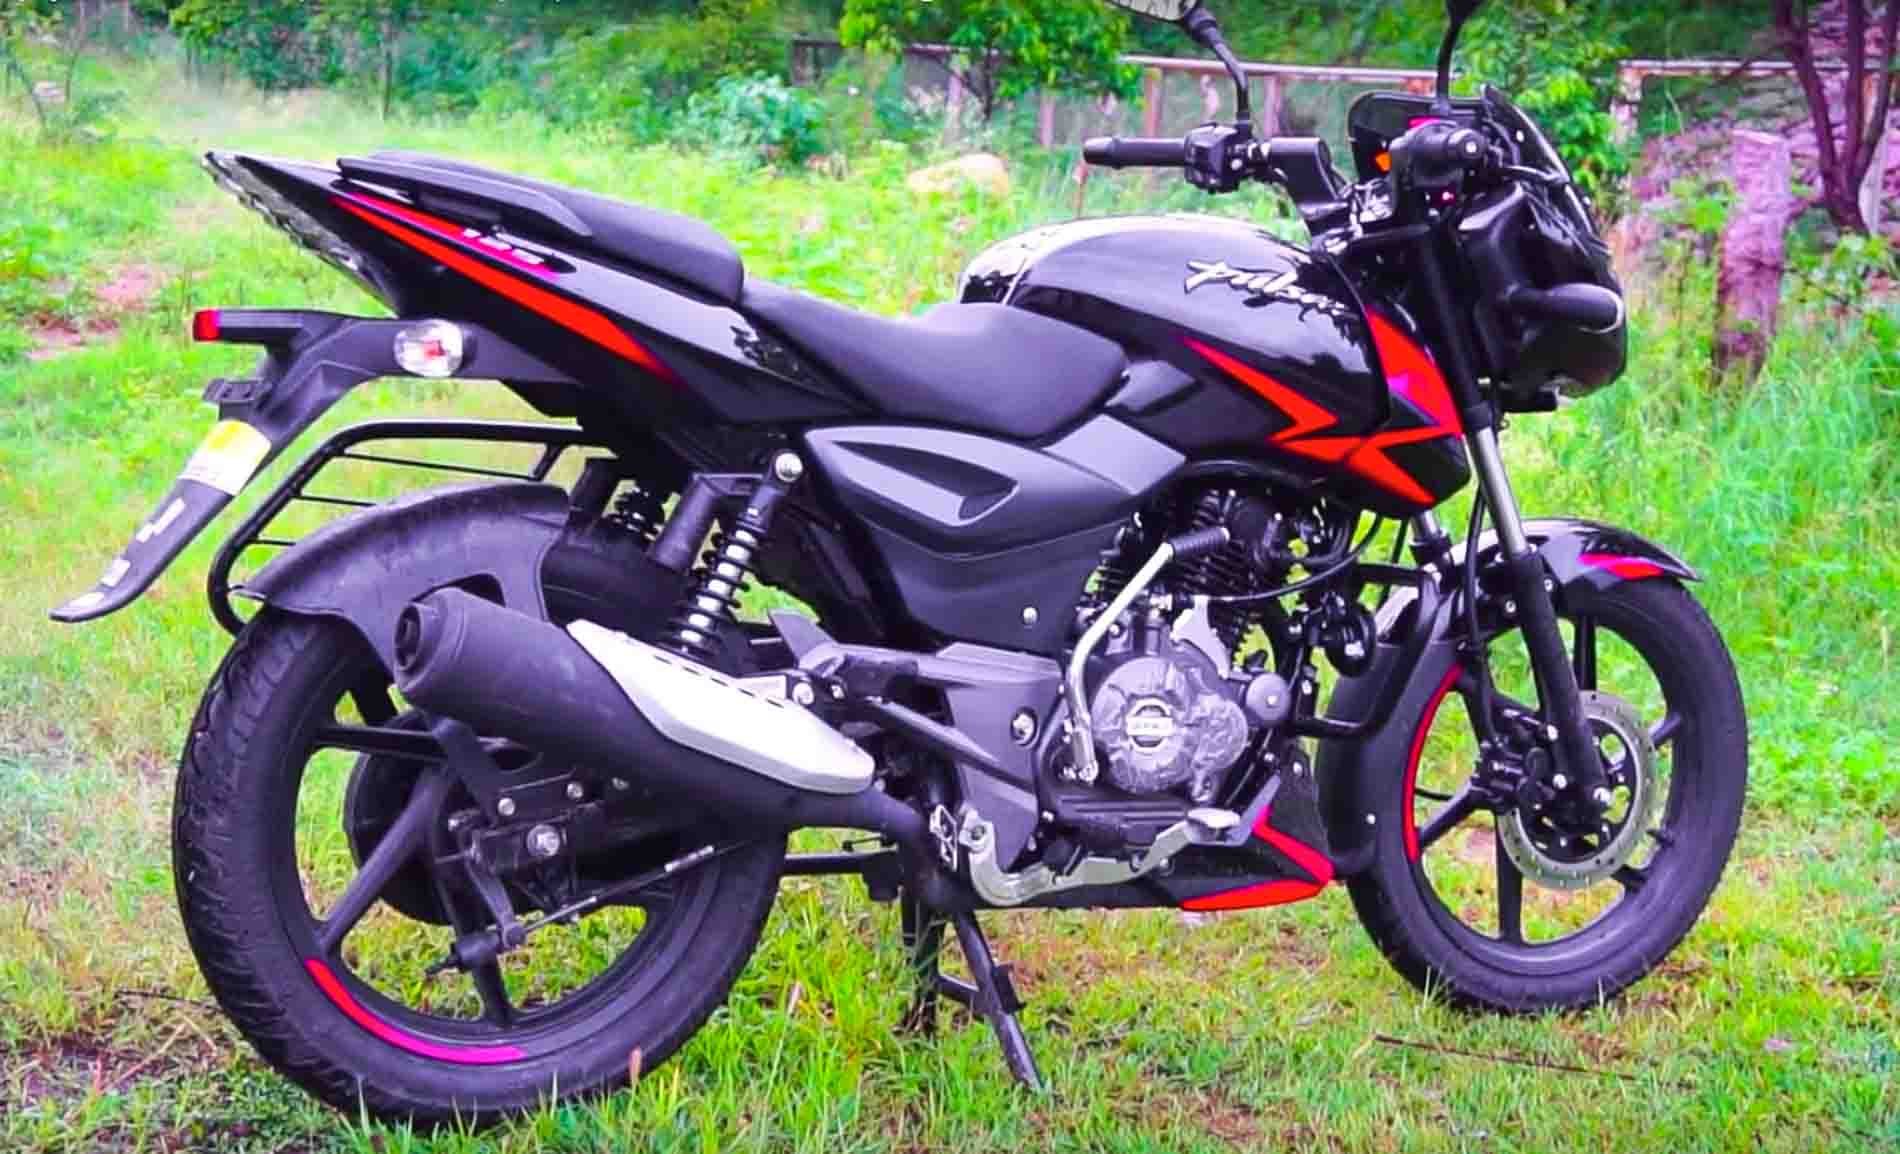 New Split Seat Variant Of Bajaj Pulsar 125 Launched At Rs Inr 70 618